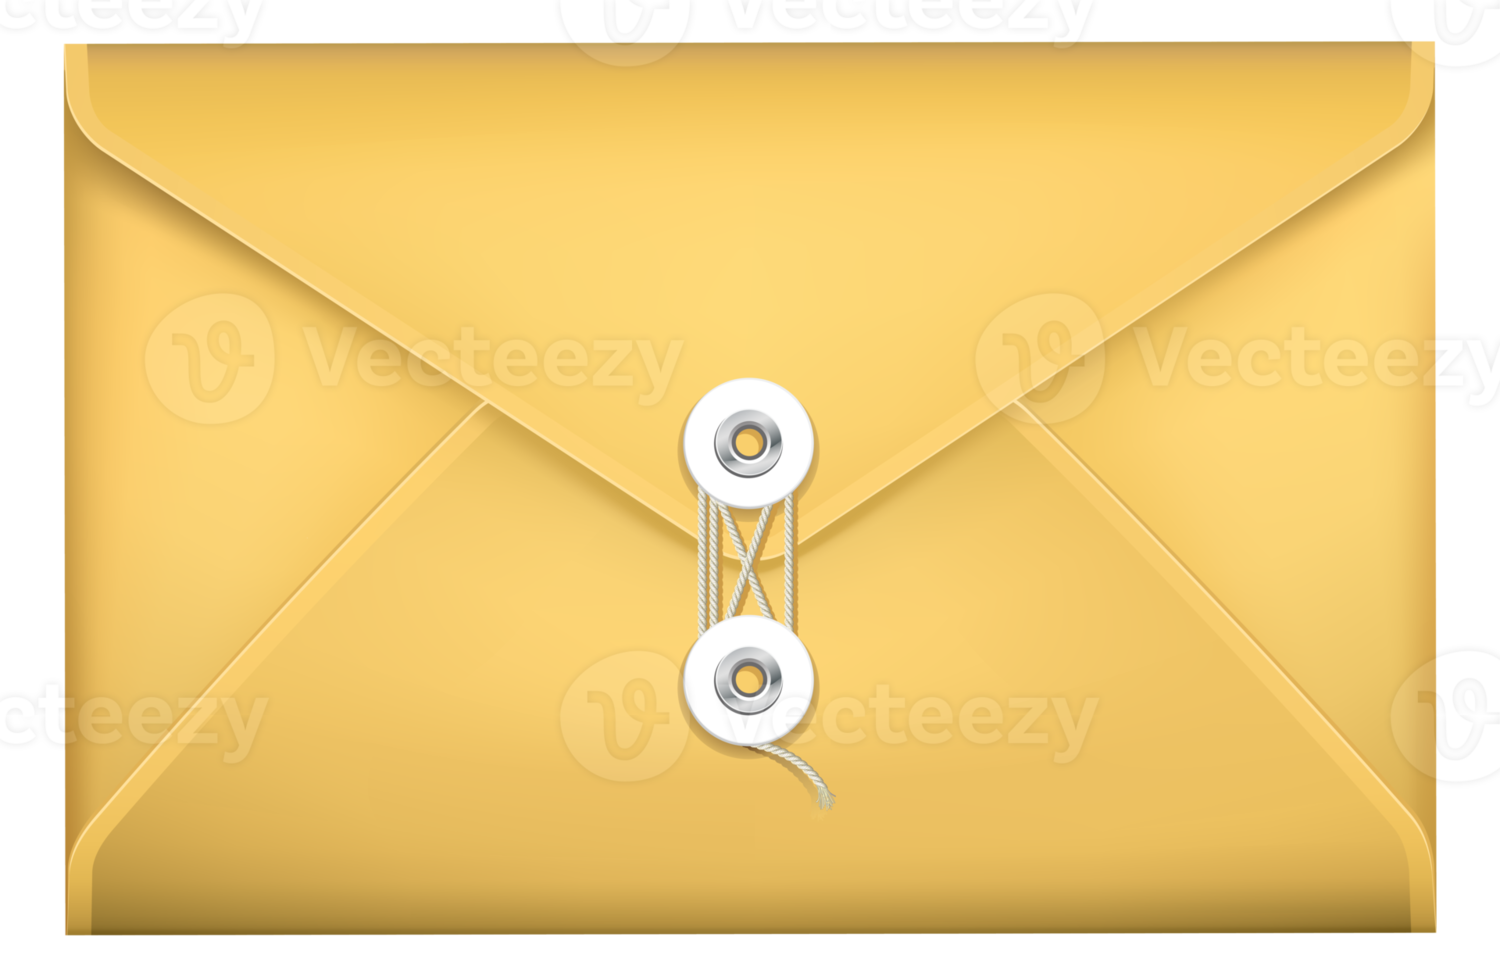 courrier enveloppe png